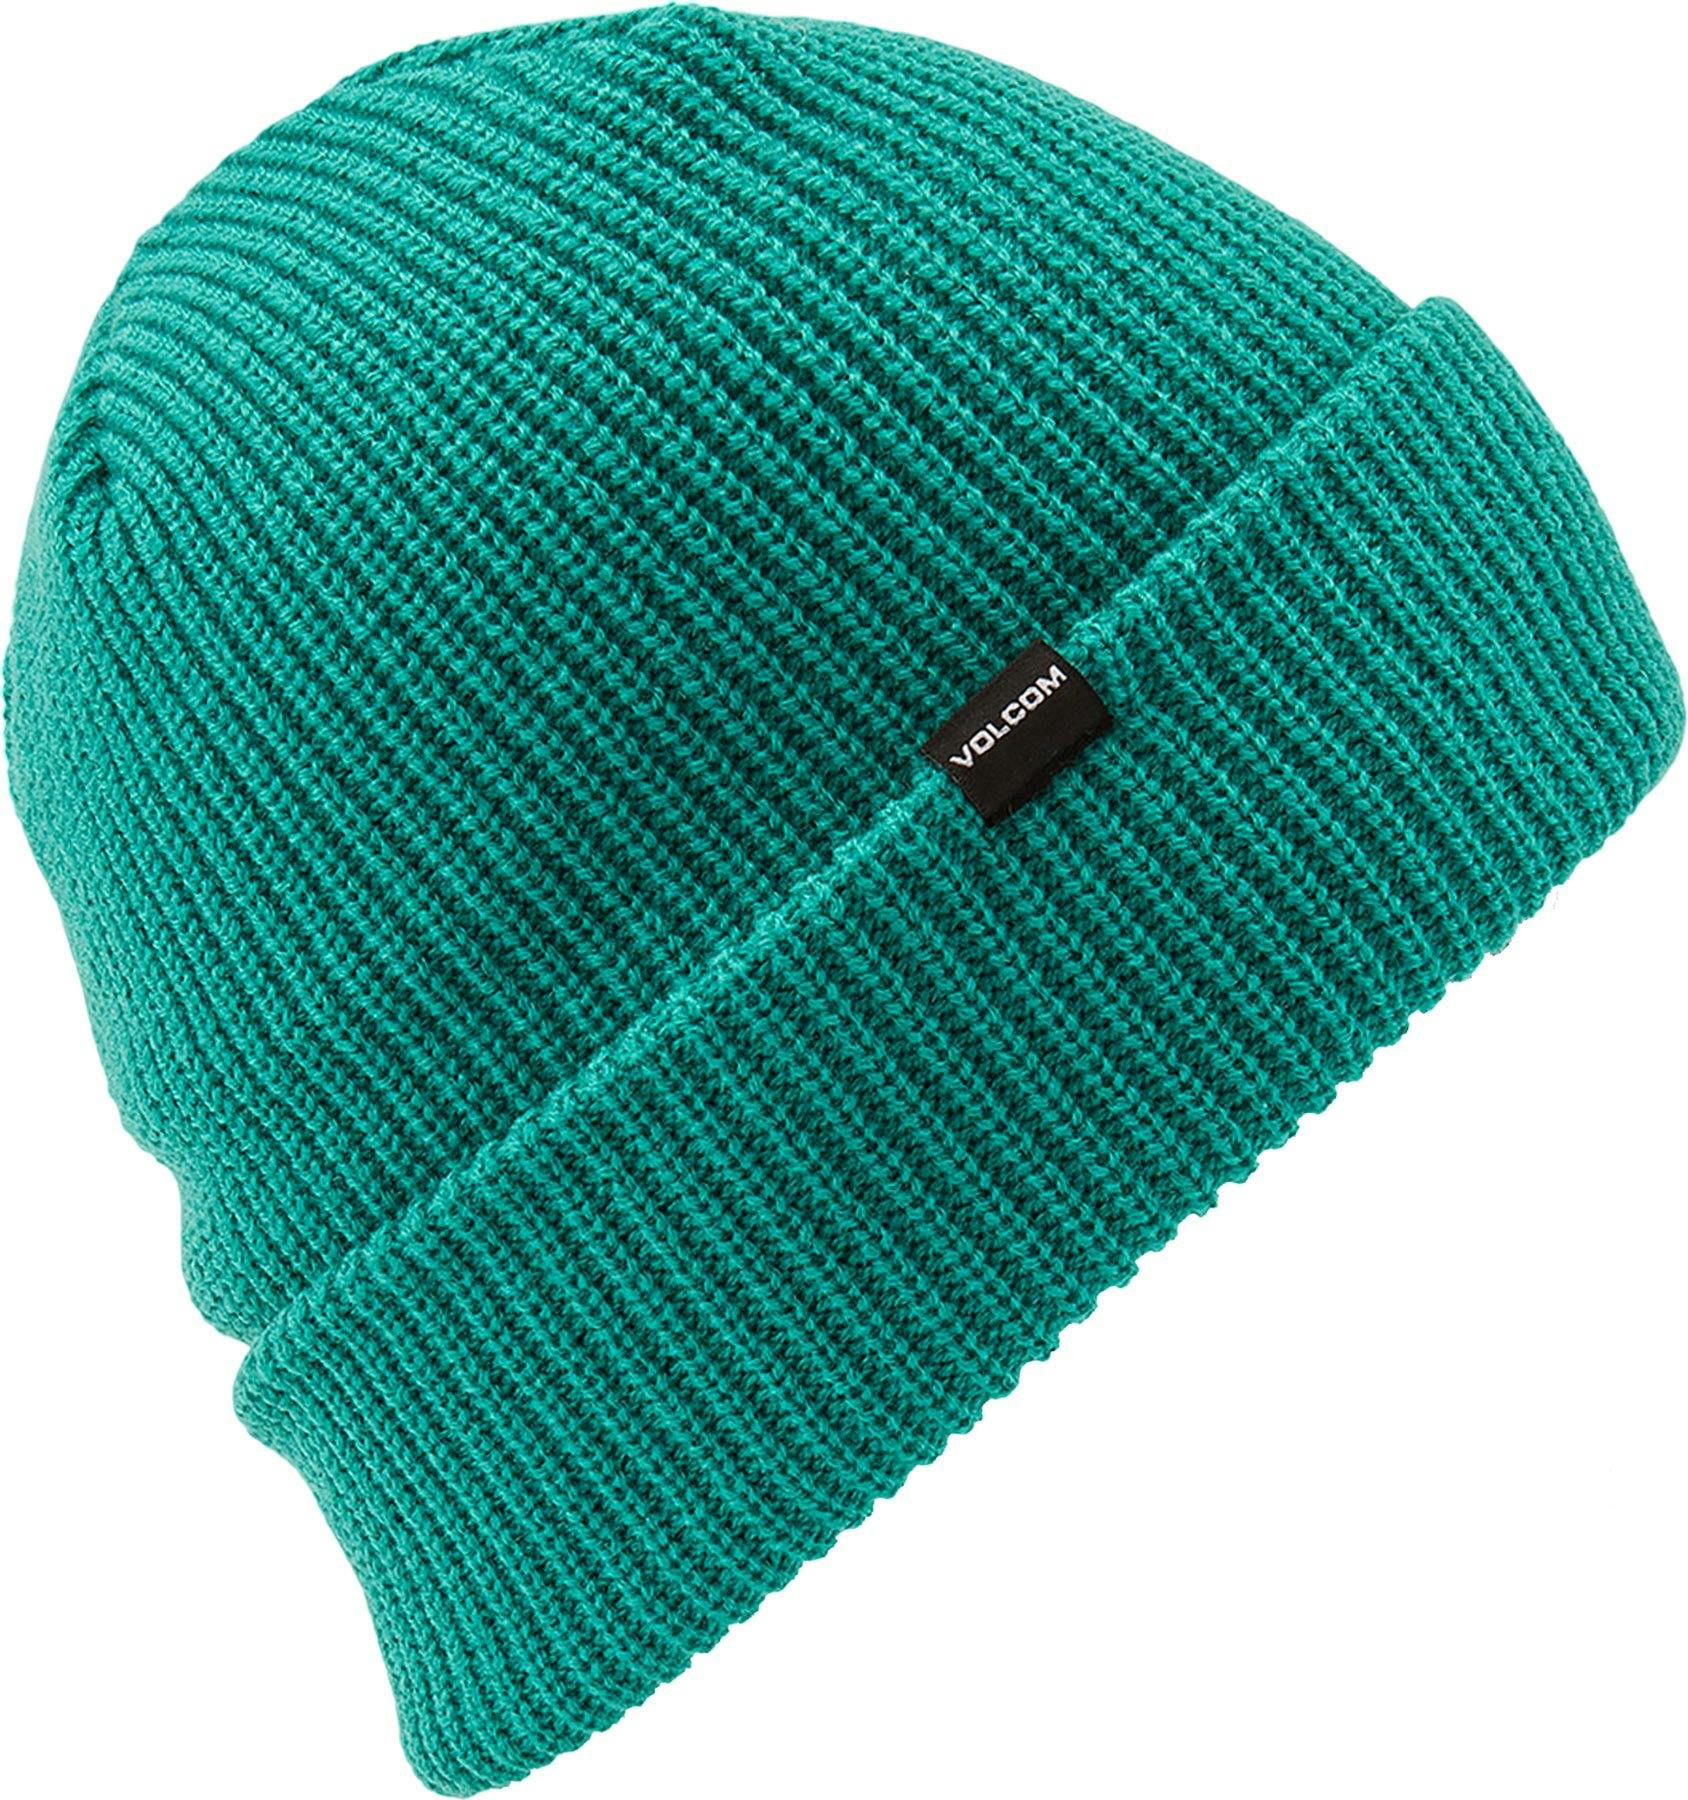 Product image for Lined Beanie - Youth